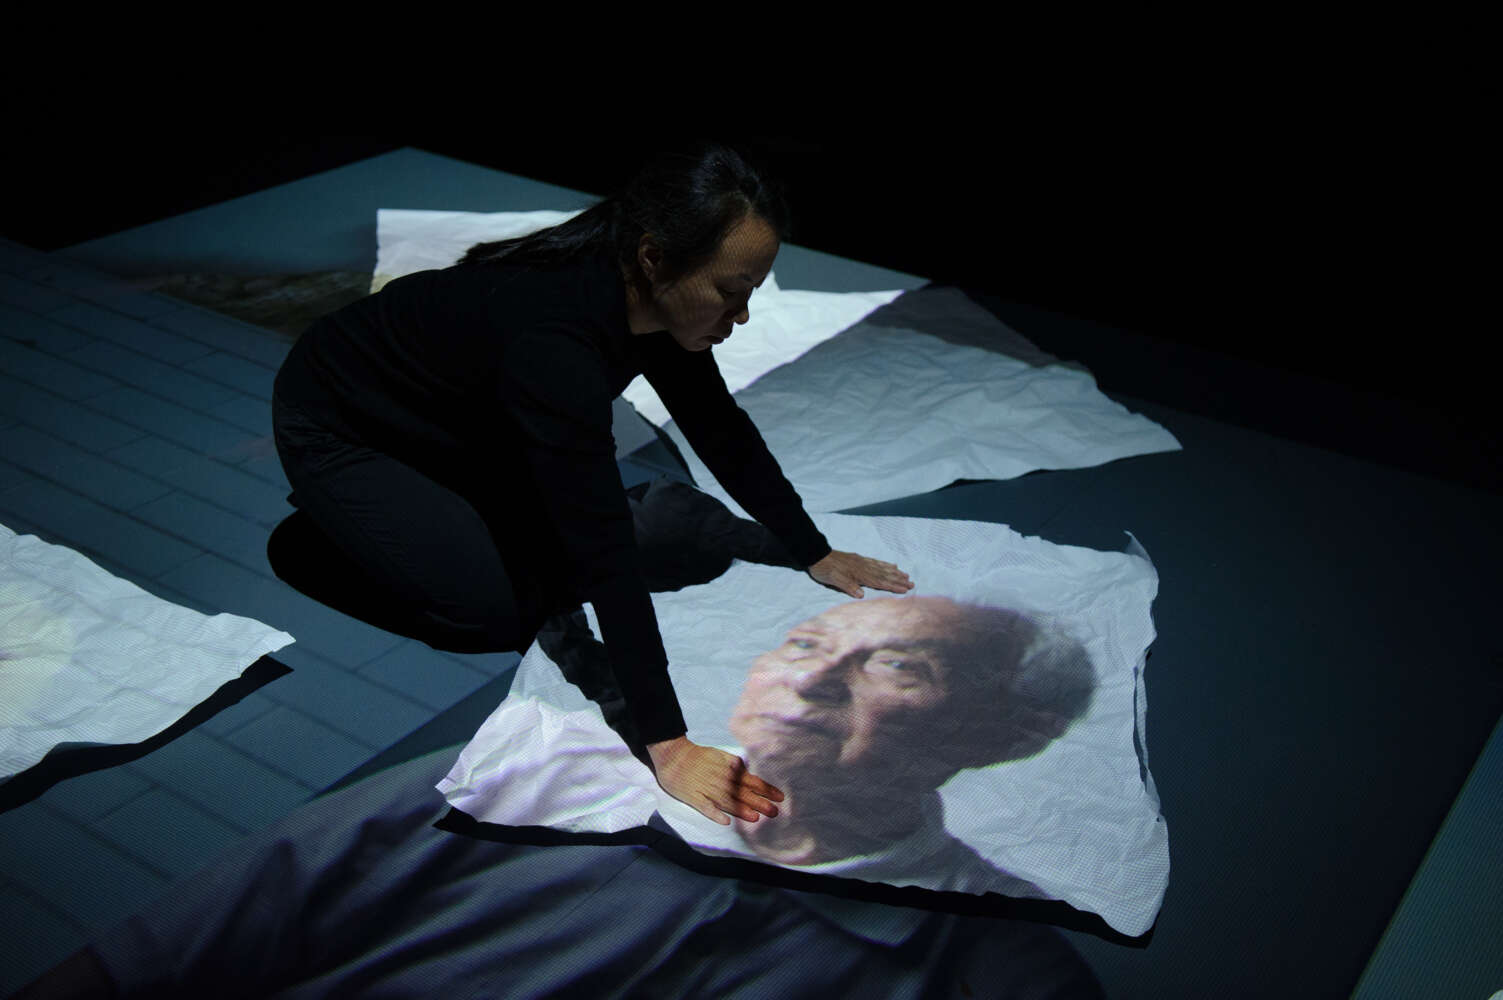 A woman leans over an image of a man projected onto paper